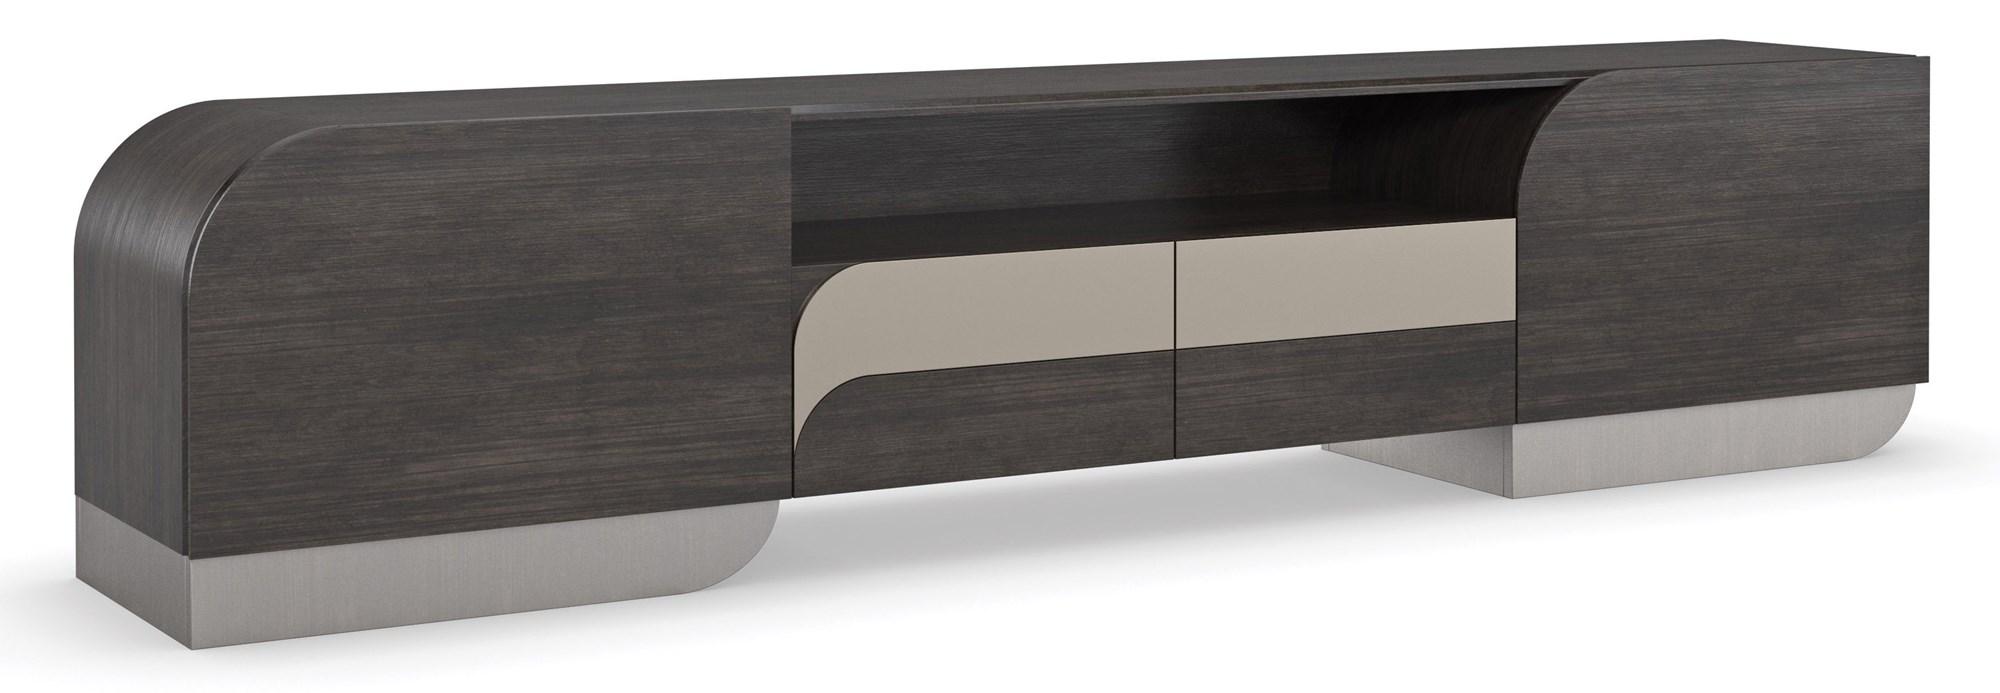 

    
Sepia & Smoked Stainless Steel Paint LA MODA MEDIA CONSOLE by Caracole
